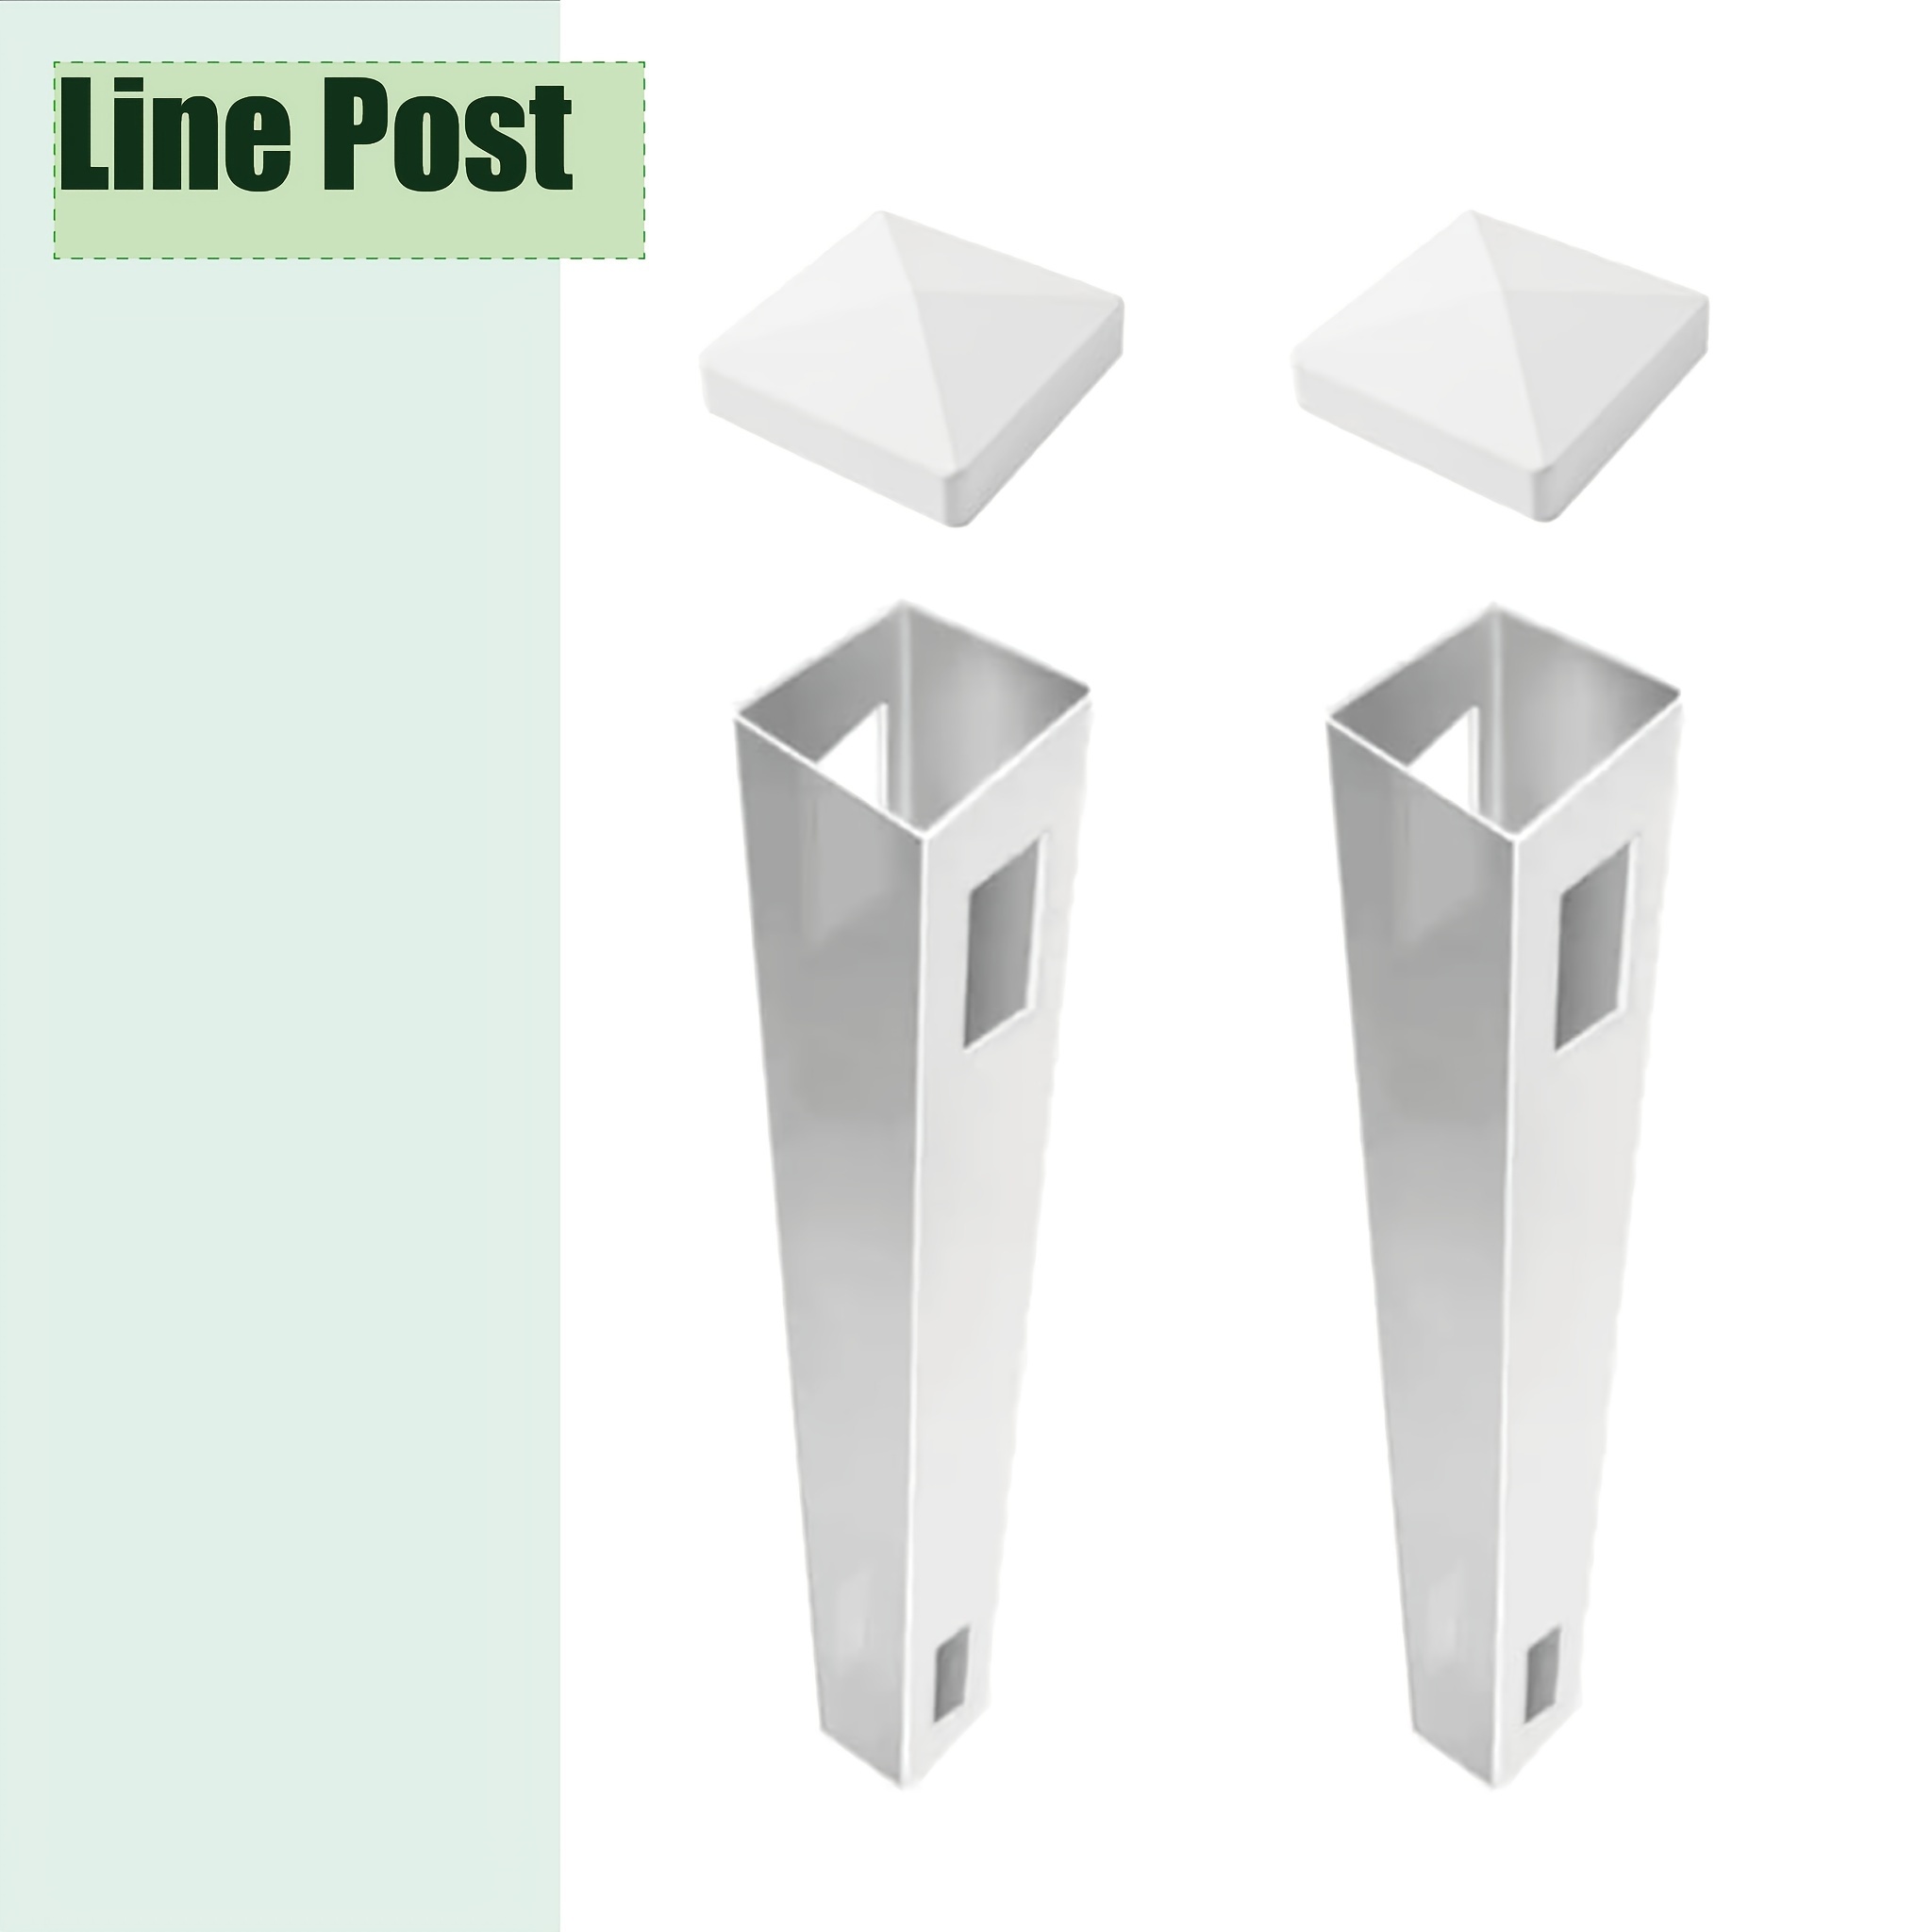 

2pcs White Vinyl Line Posts With Routed Holes & Caps, 5x5x95 Inches For Vinyl Fence Project, Pre-cut For Rails, Durable Outdoor Fencing System